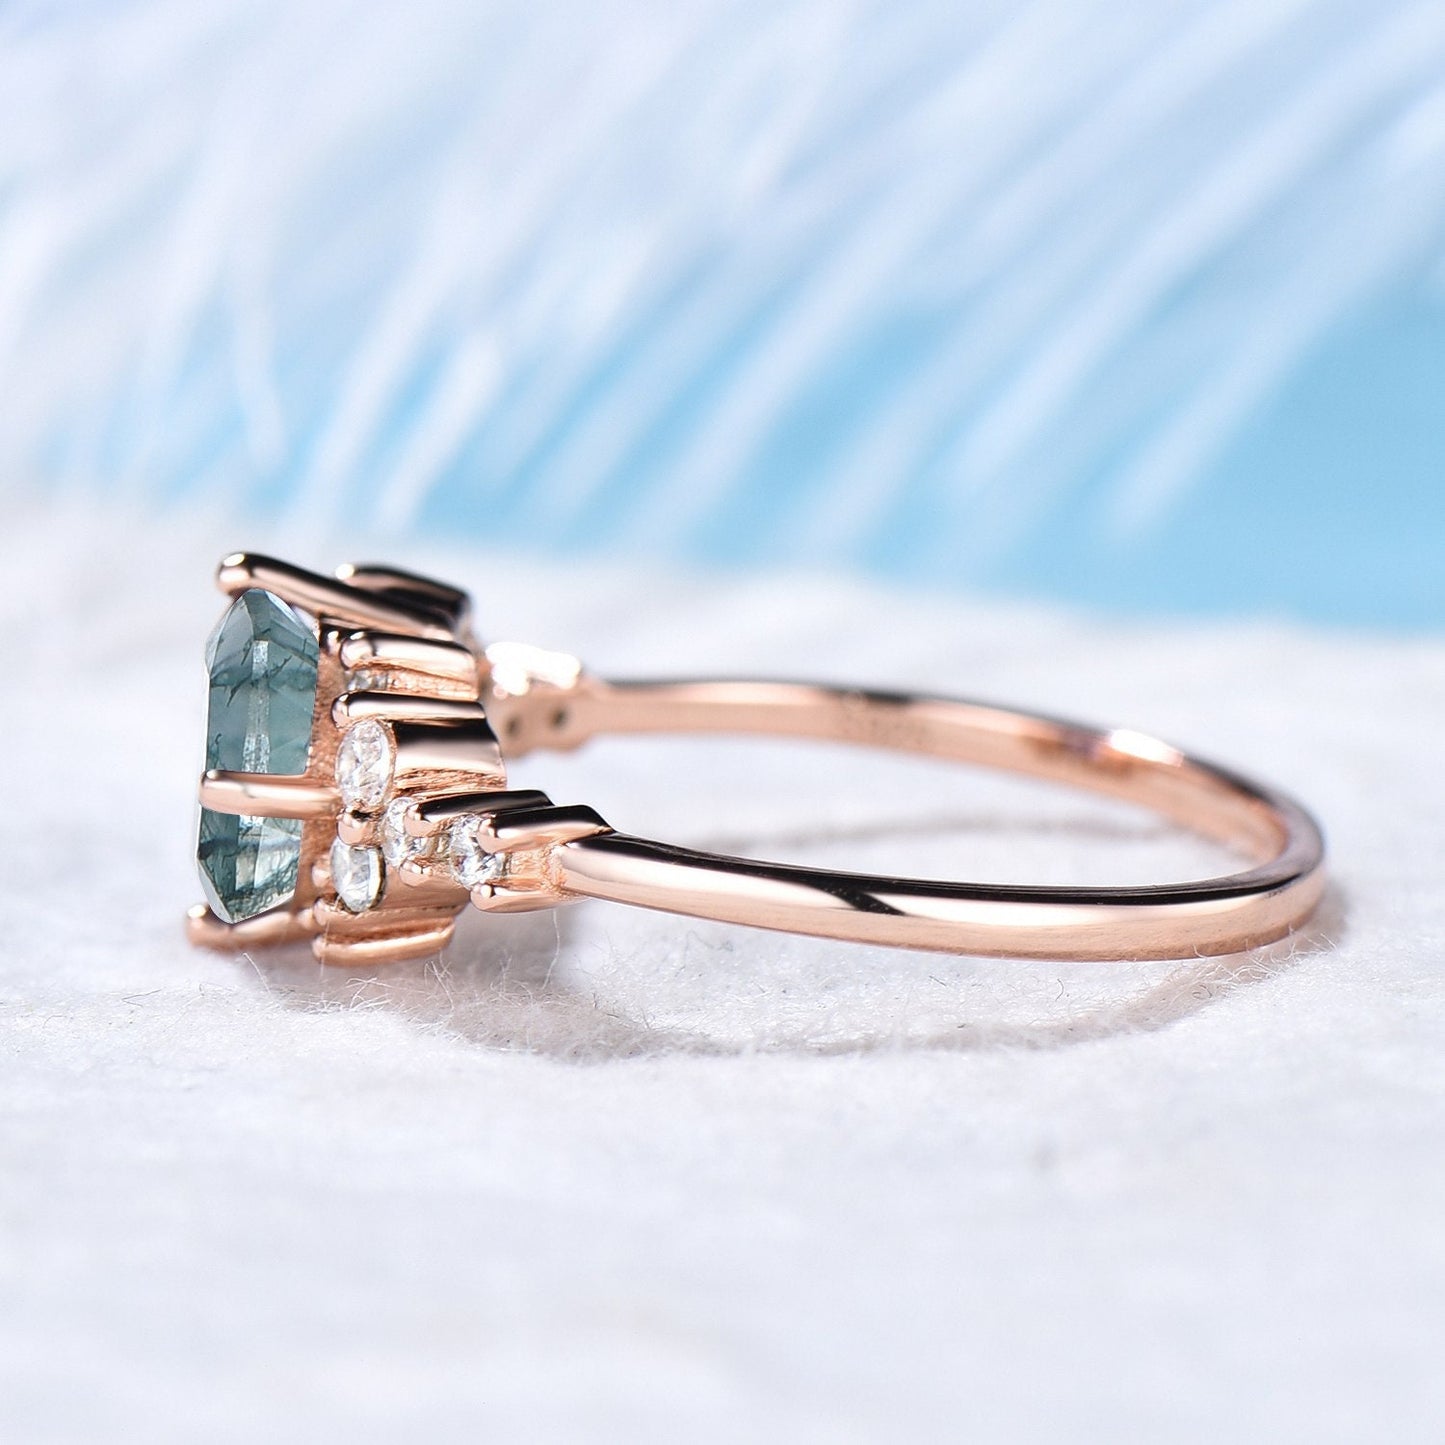 Cushion Cut Natural Green Clear Moss Agate Ring 14K Gold Square Moss Agate Cluster Snowdrift Engagement Ring For Women Crystal Jewelry Gift